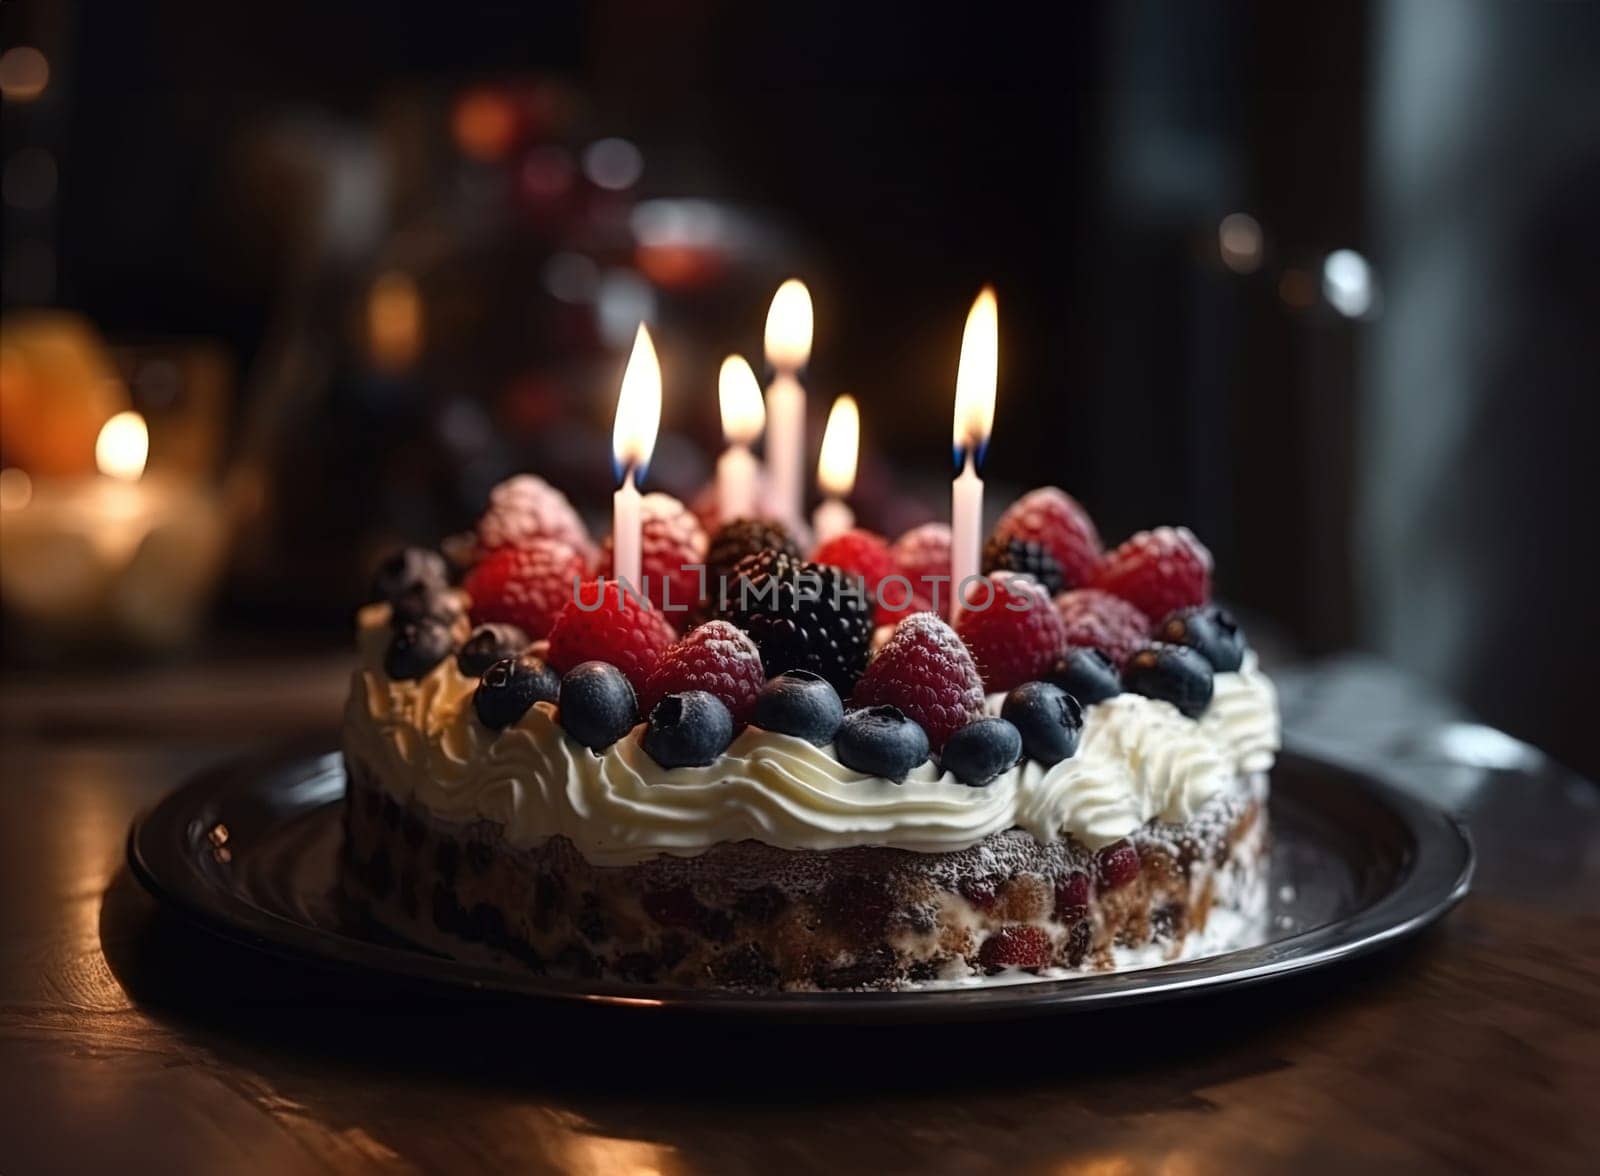 Close-up shot of a small cake with assorted berries and candles on a plate on the table with a blurred background